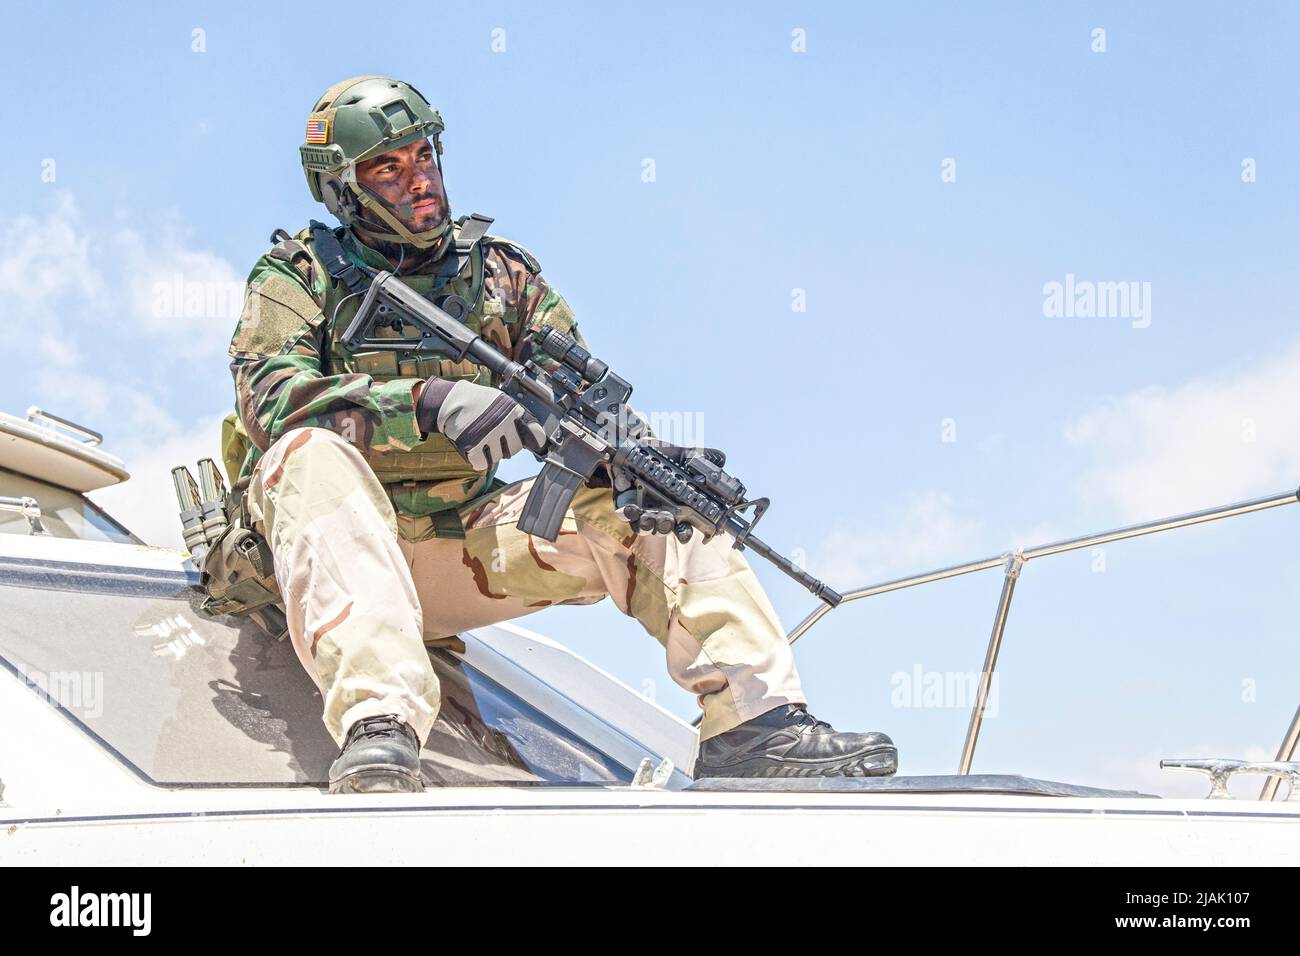 Navy SEALs fighter sitting on the bow of a speed boat with service rifle in hand. Stock Photo